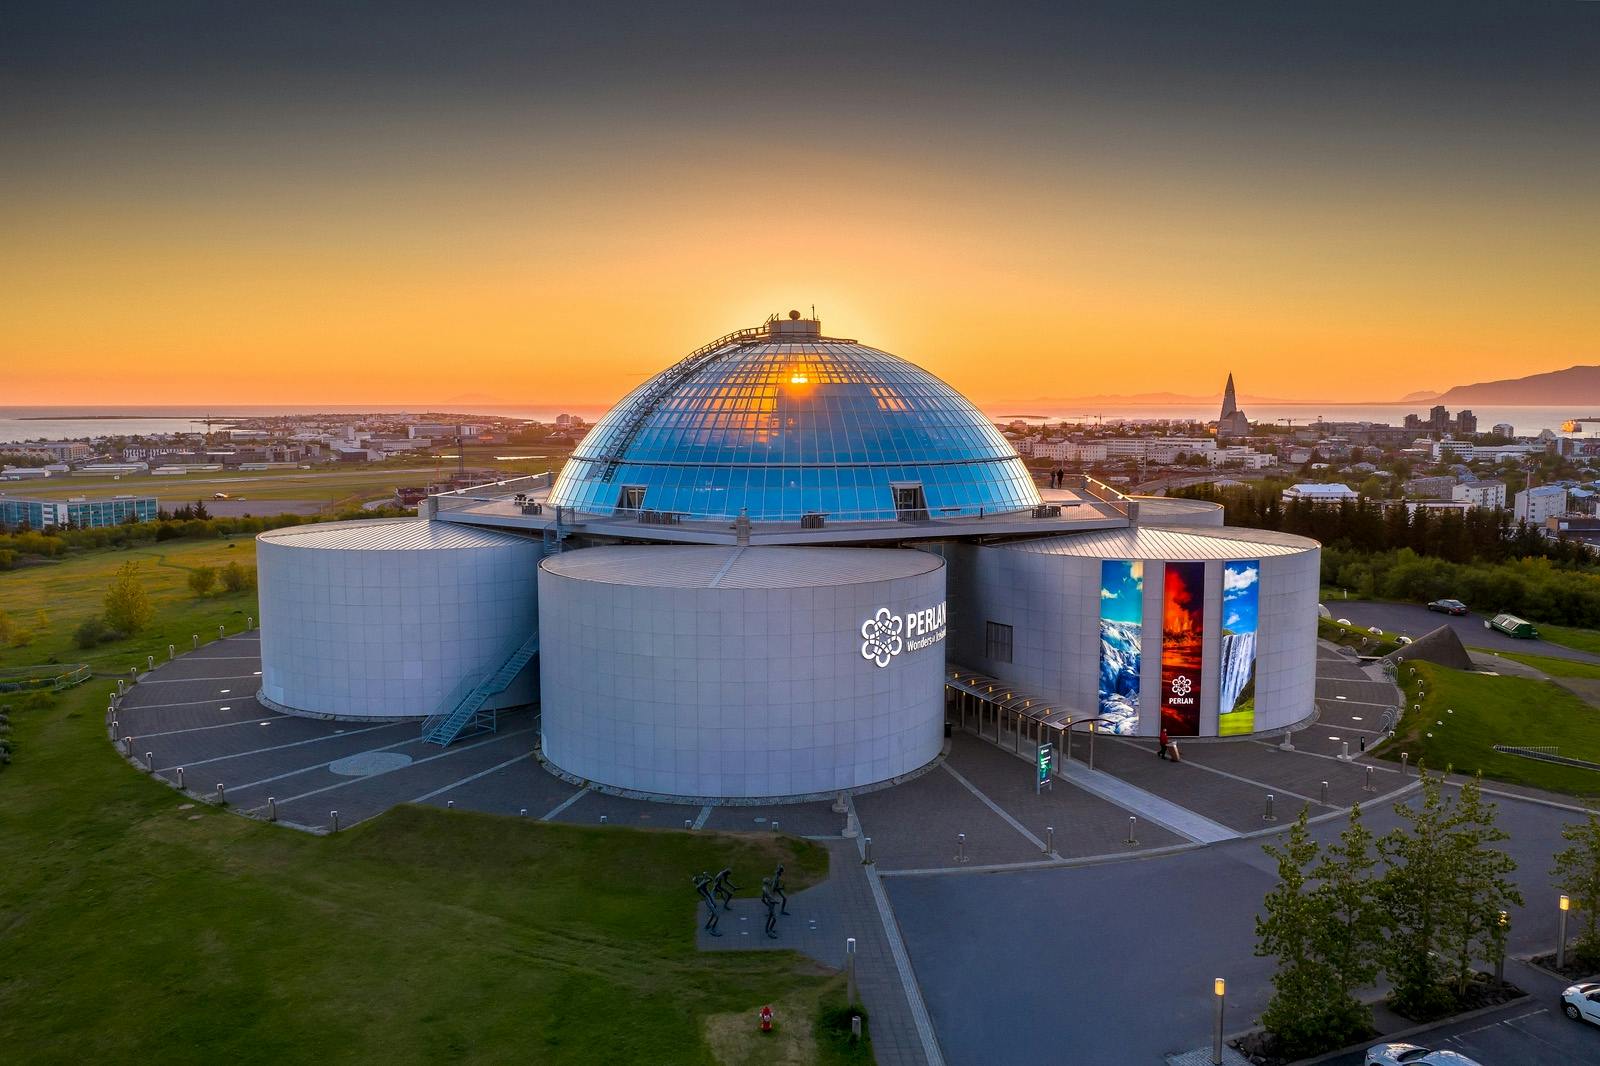 Wonders of Iceland and Aurora show at the Perlan Musement